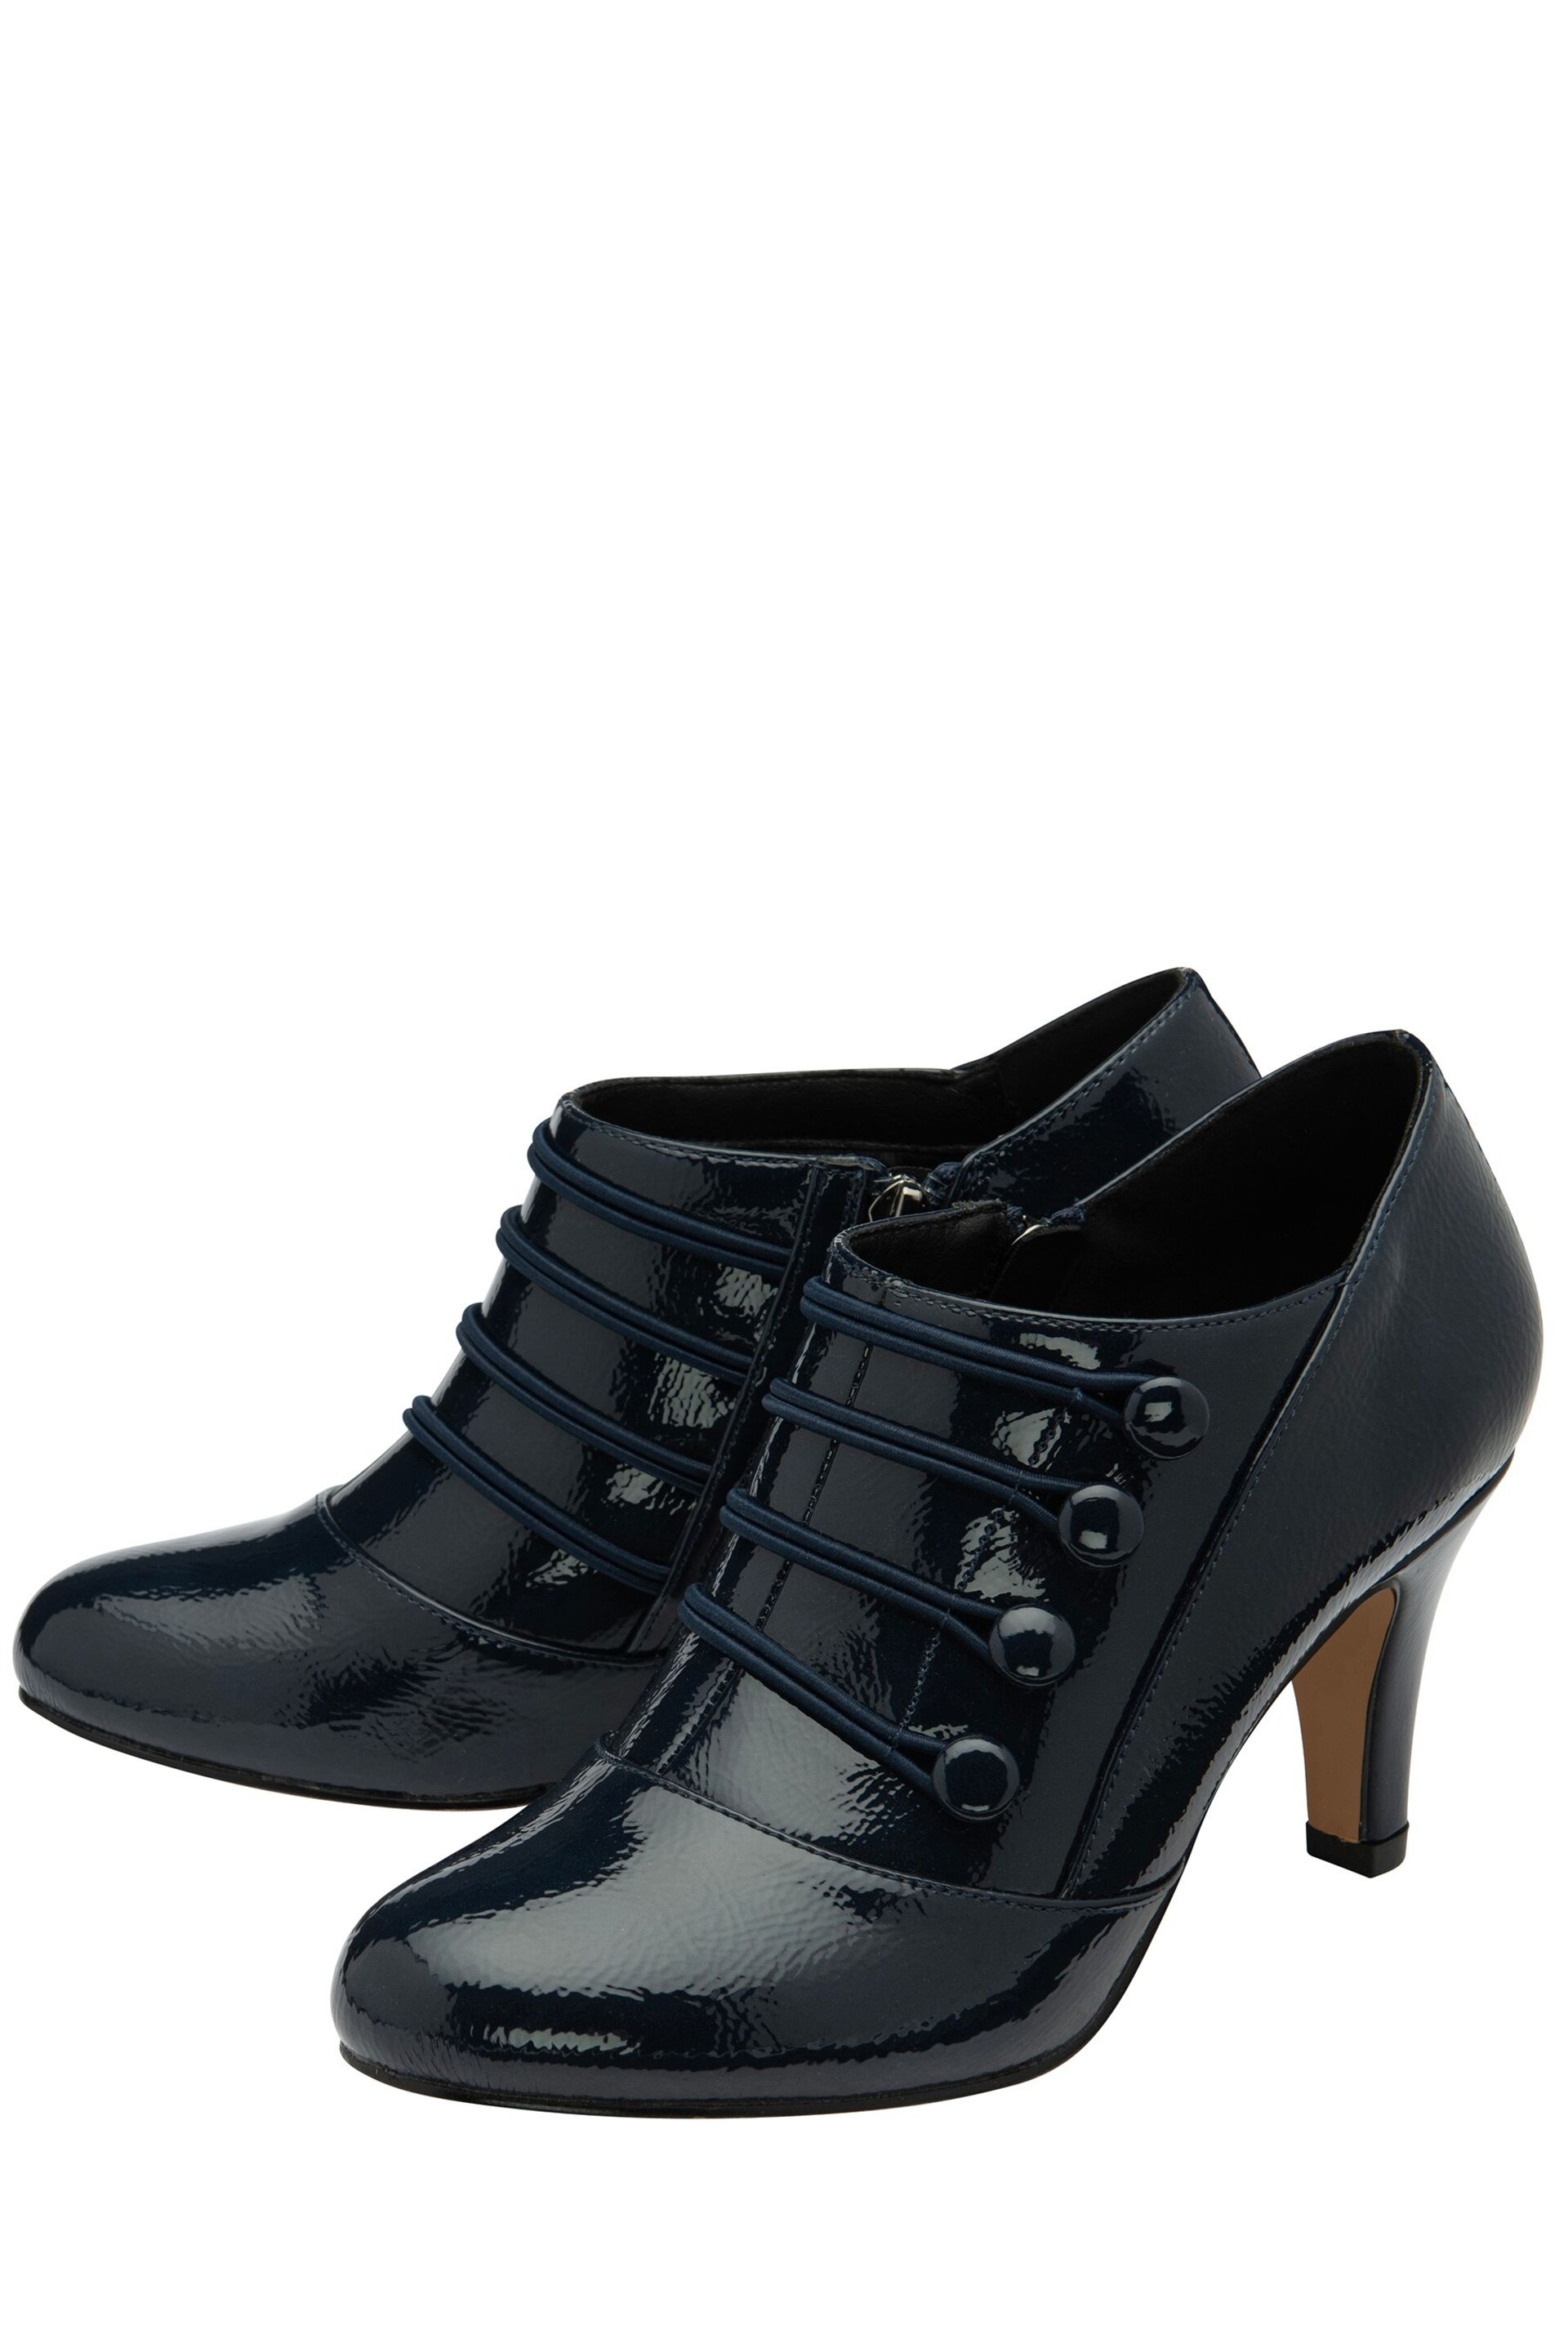 Lotus Navy Blue Patent Shoe Boots - Image 2 of 4